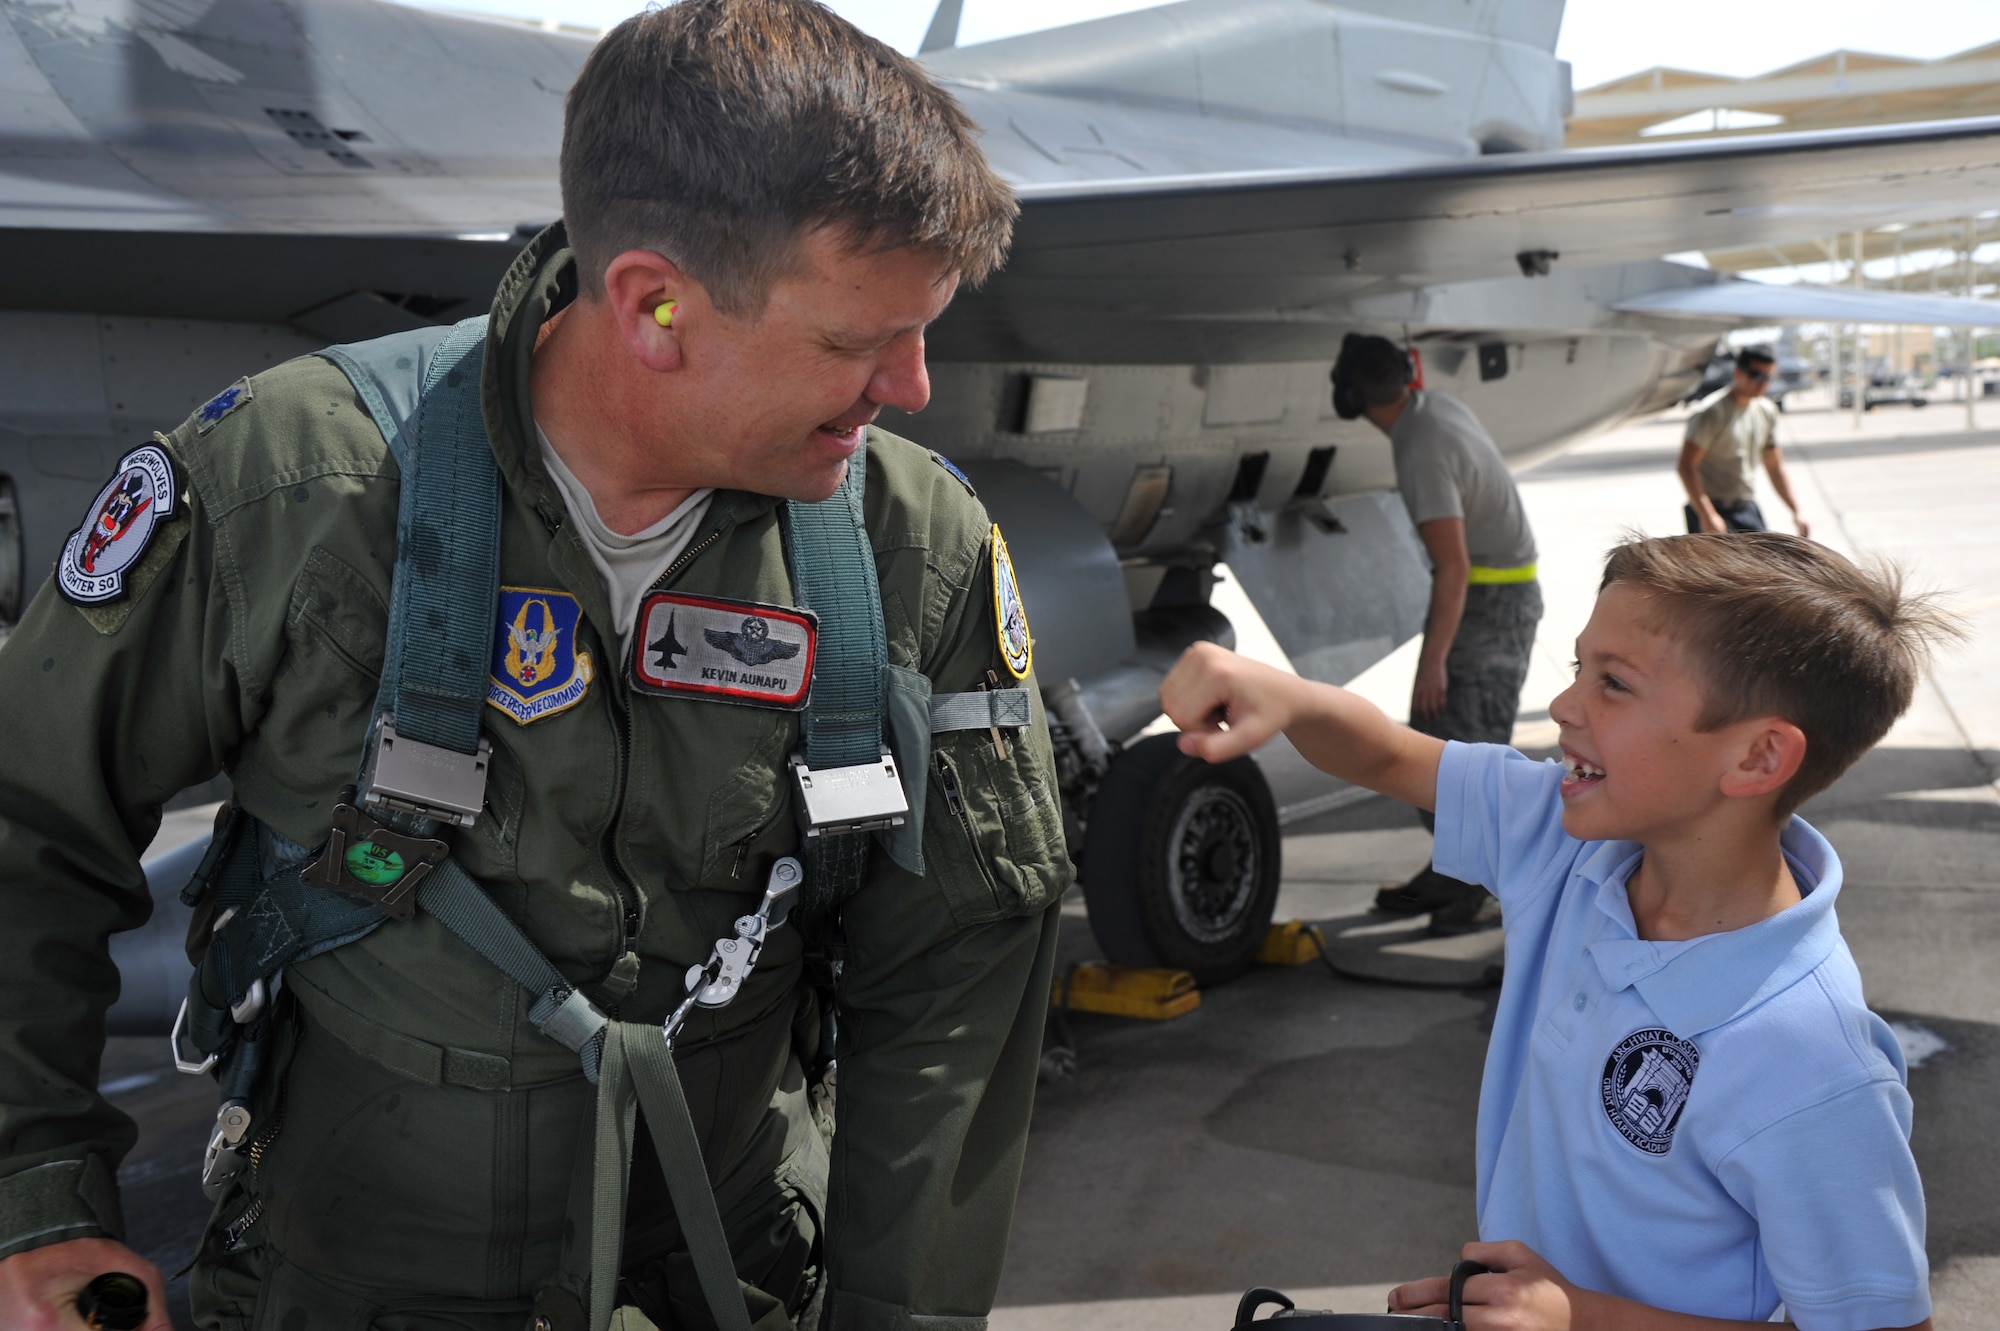 Lt. Col. Kevin Aunapu, 69th Fighter Squadron director of operations, gets a congratulatory punch from his son, after completing his 3,000th flying hour March 21 at Luke Air Force Base. (U.S. Air Force photo/Senior Airman Sandra Welch)